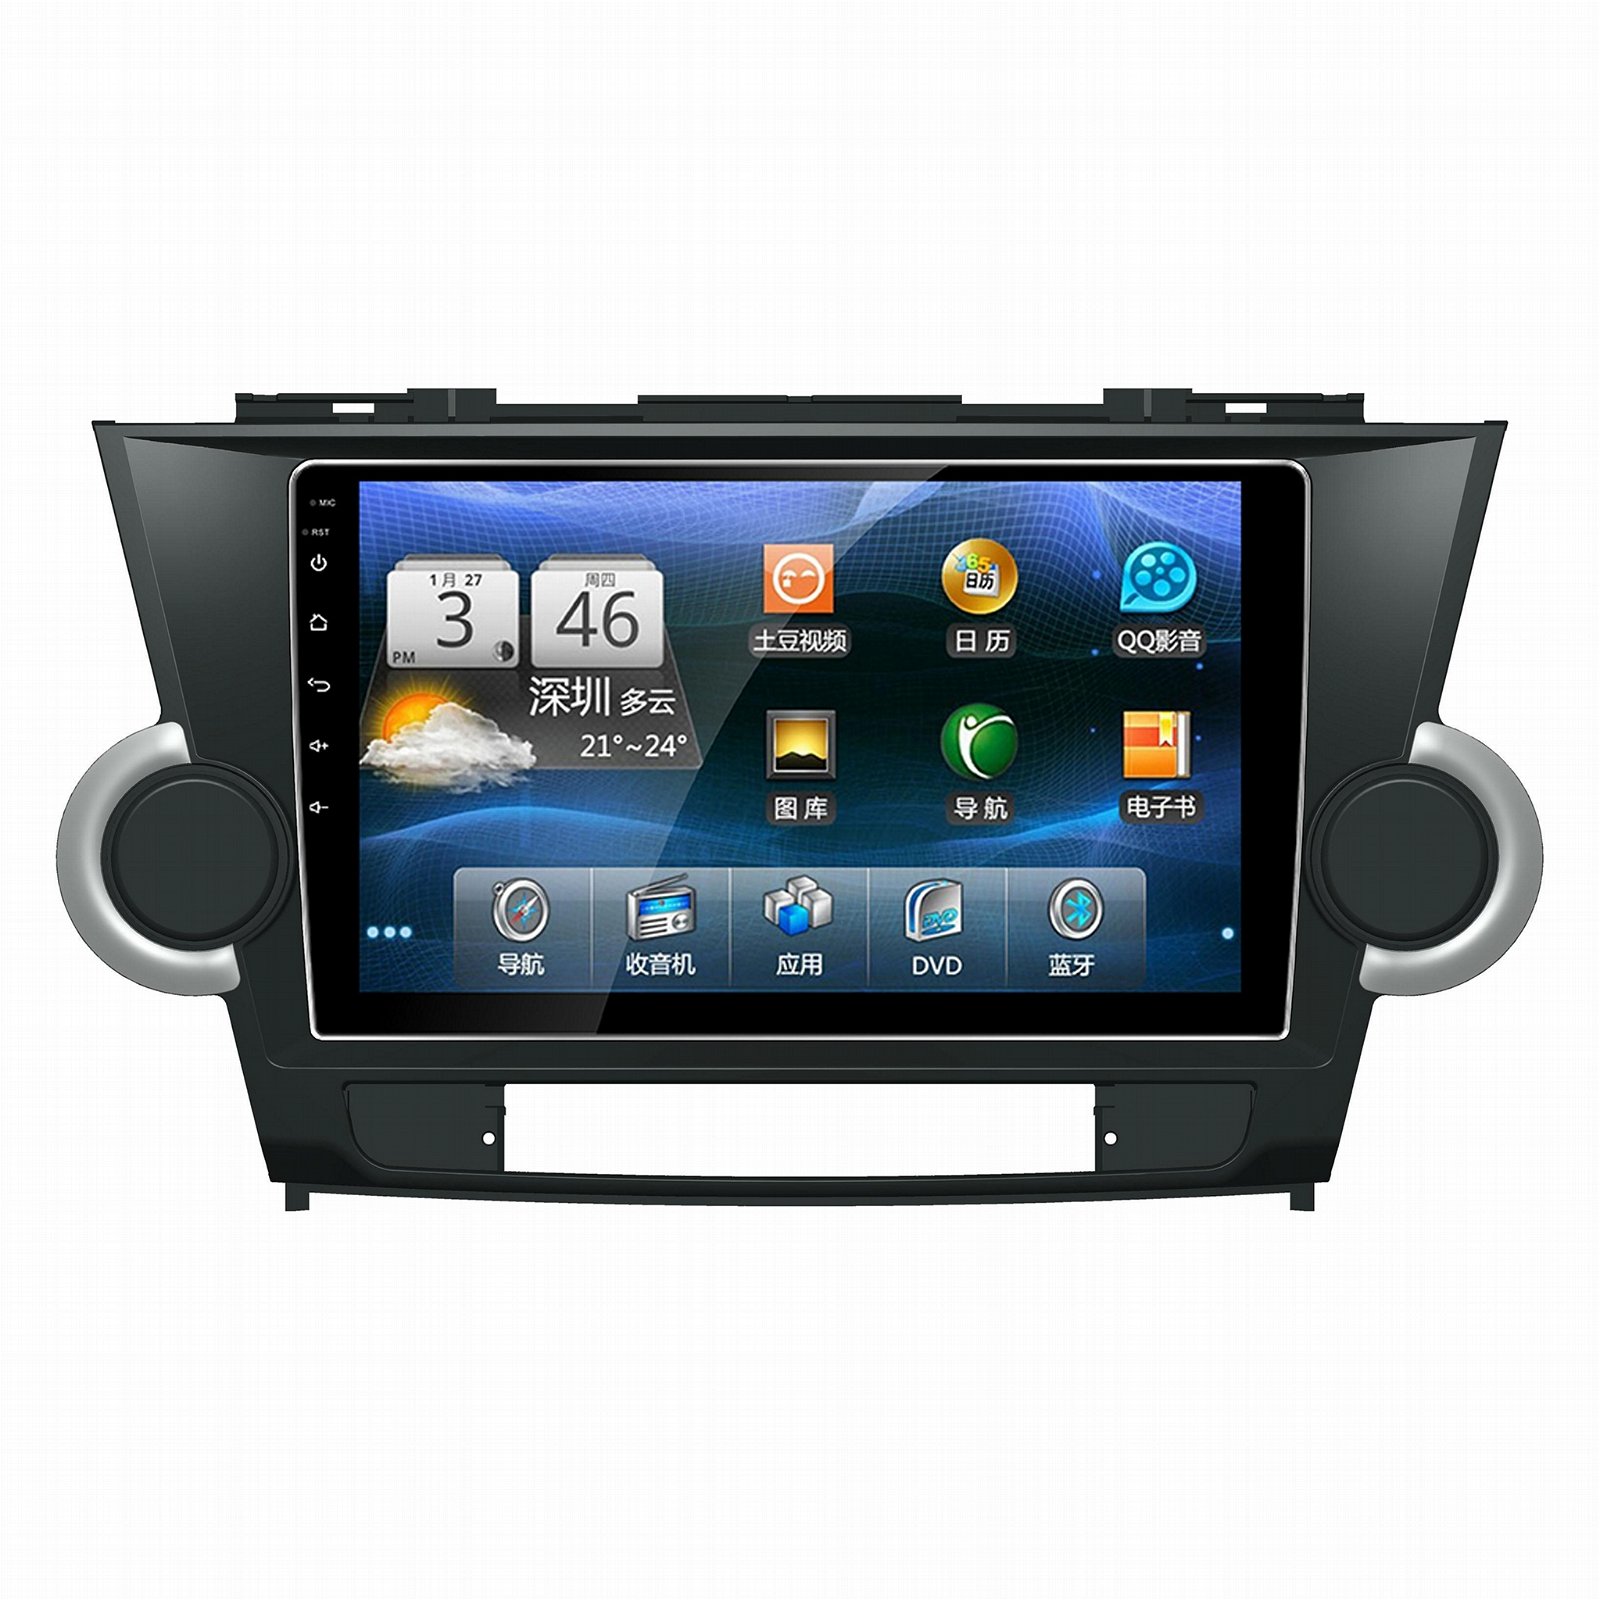 9inch Android 6.0 CAR DVD Player for Toyota Highlander  Radio GPS Navigation